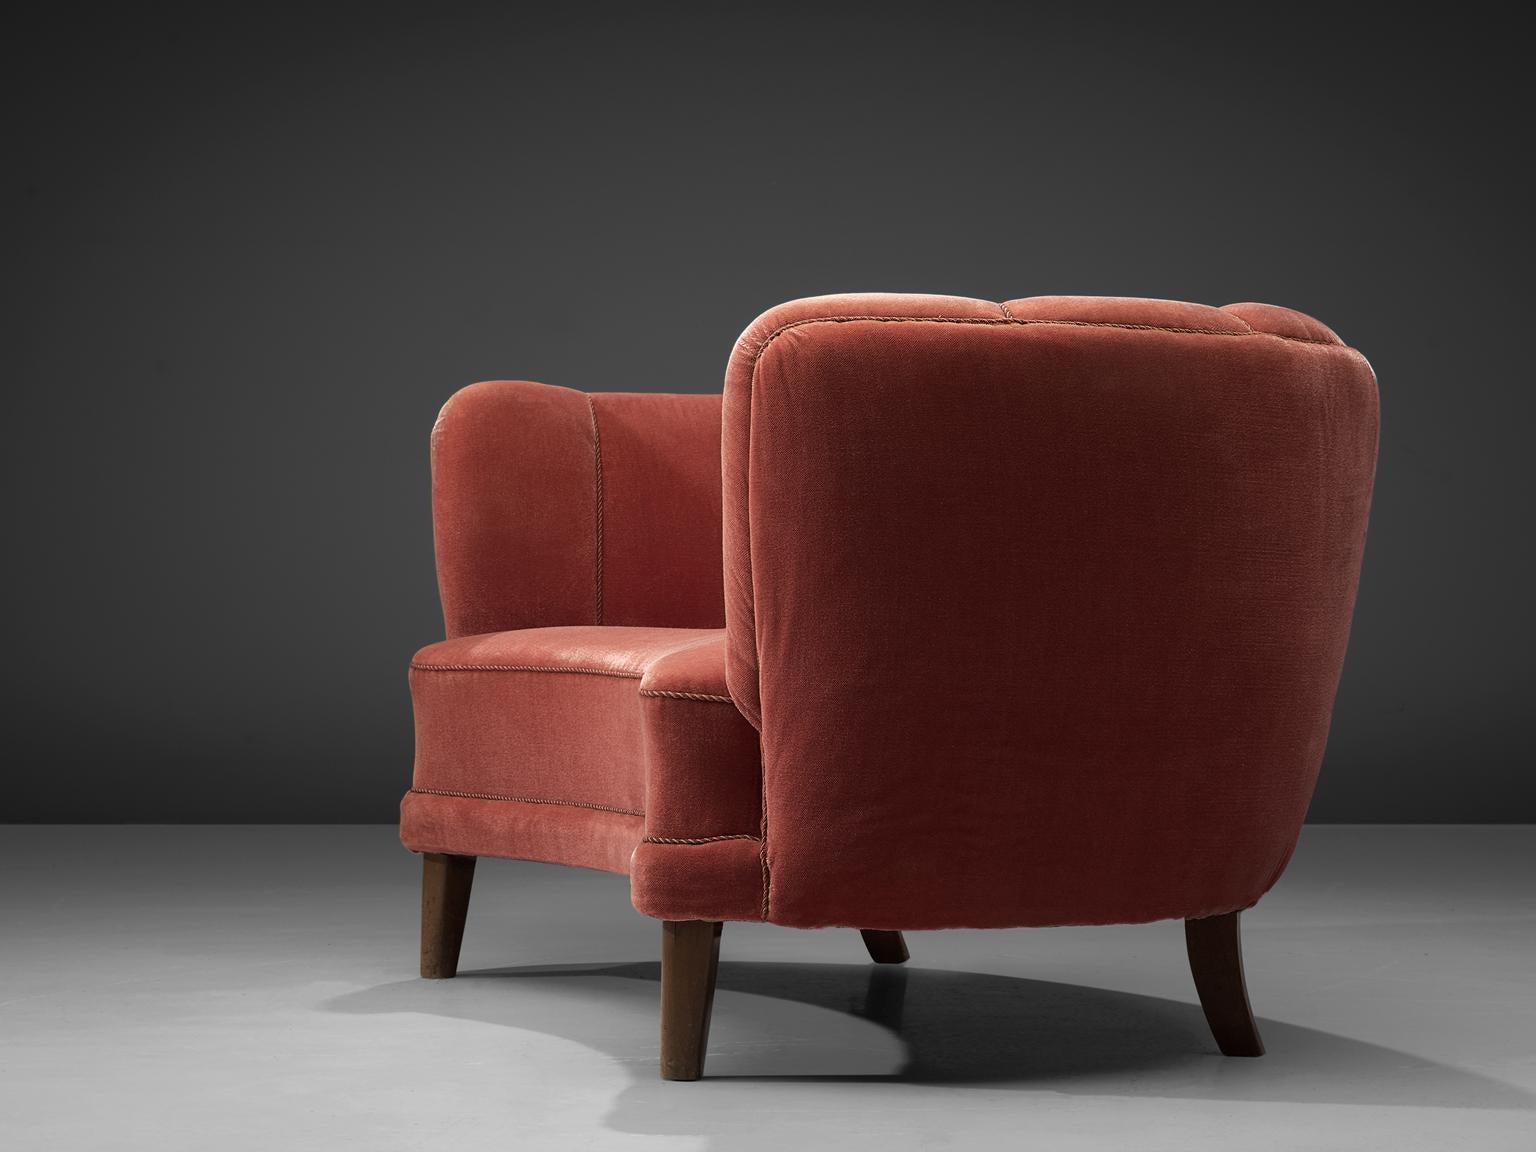 Sofa, red velvet and oak, France, 1950s

This voluptuous sofa is executed with wooden legs and shimmering red colored velvet fabric. The sofa has a high webbed, curved back and a thick body, both the back that flow into the armrests is bulky and